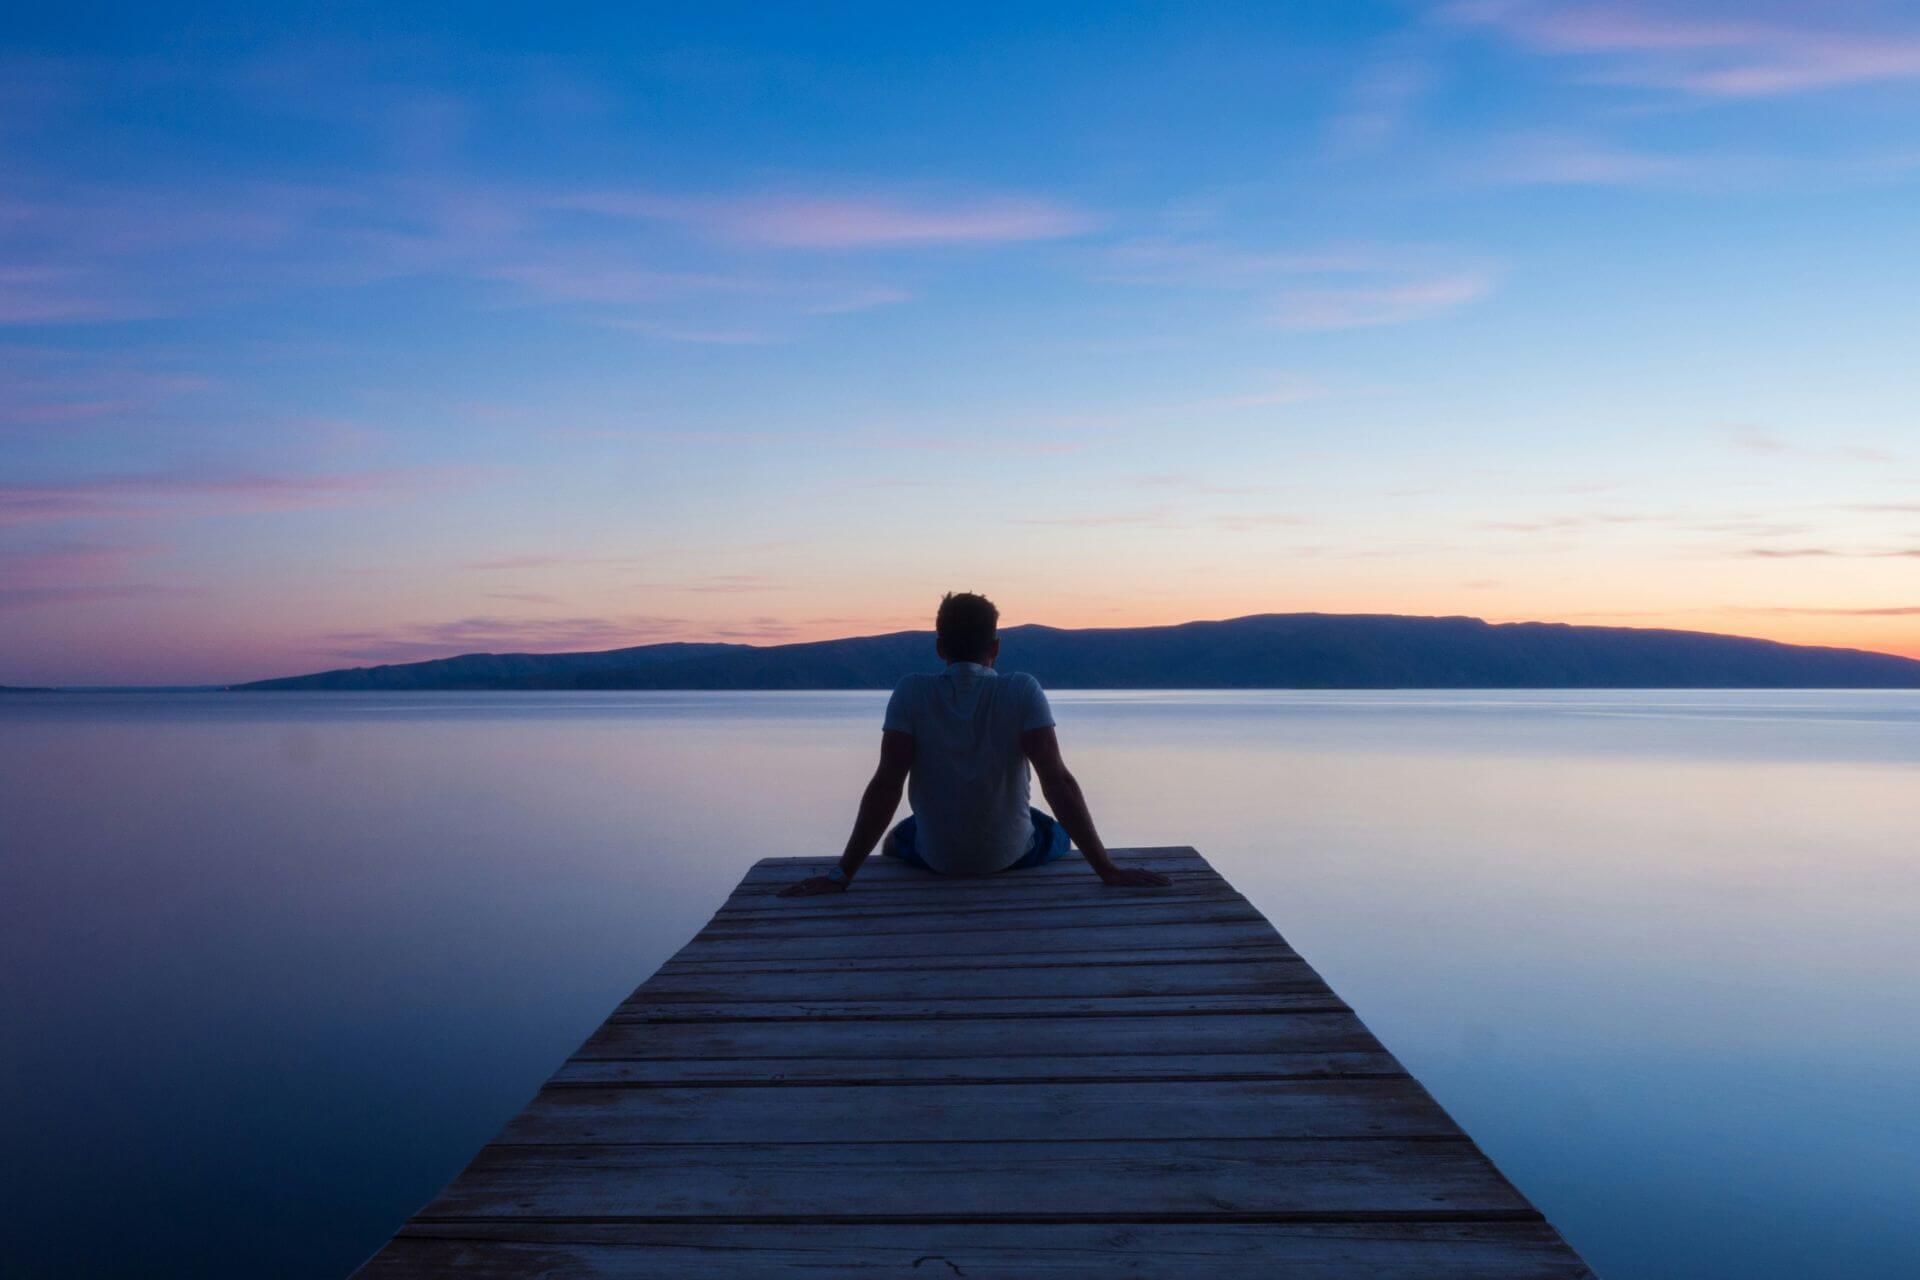 A person sitting at the end of a wooden dock looking out at a calm lake with hills in the background and a colorful sunset sky.